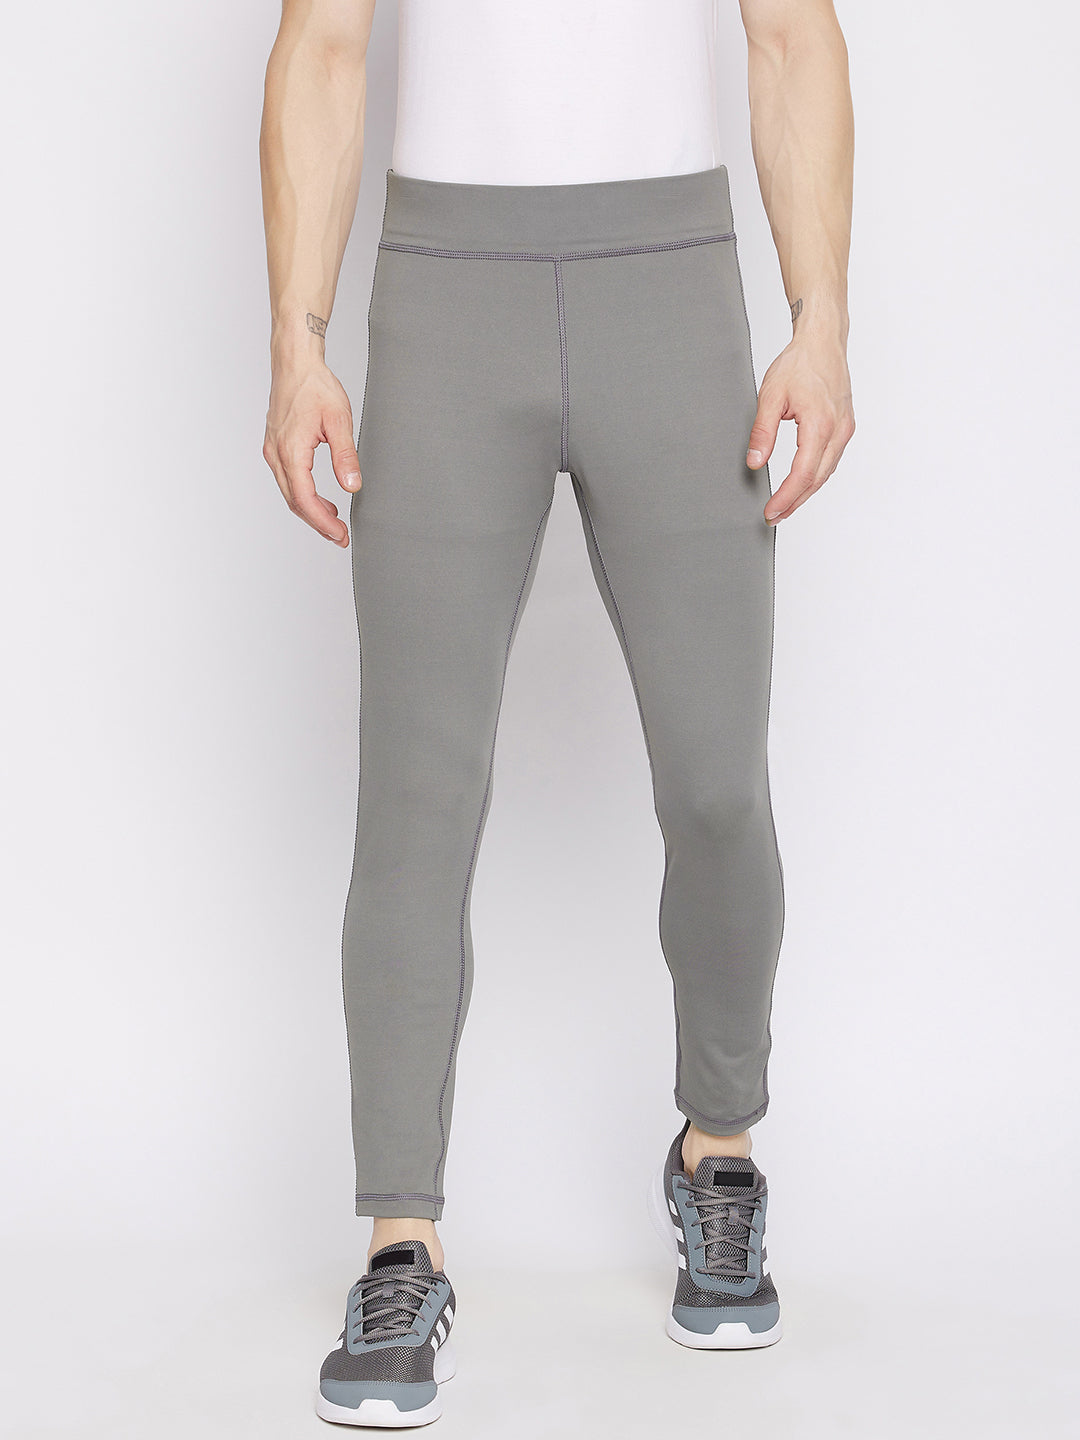 Boys' Fitted Performance Tights - All In Motion™ Light Gray S